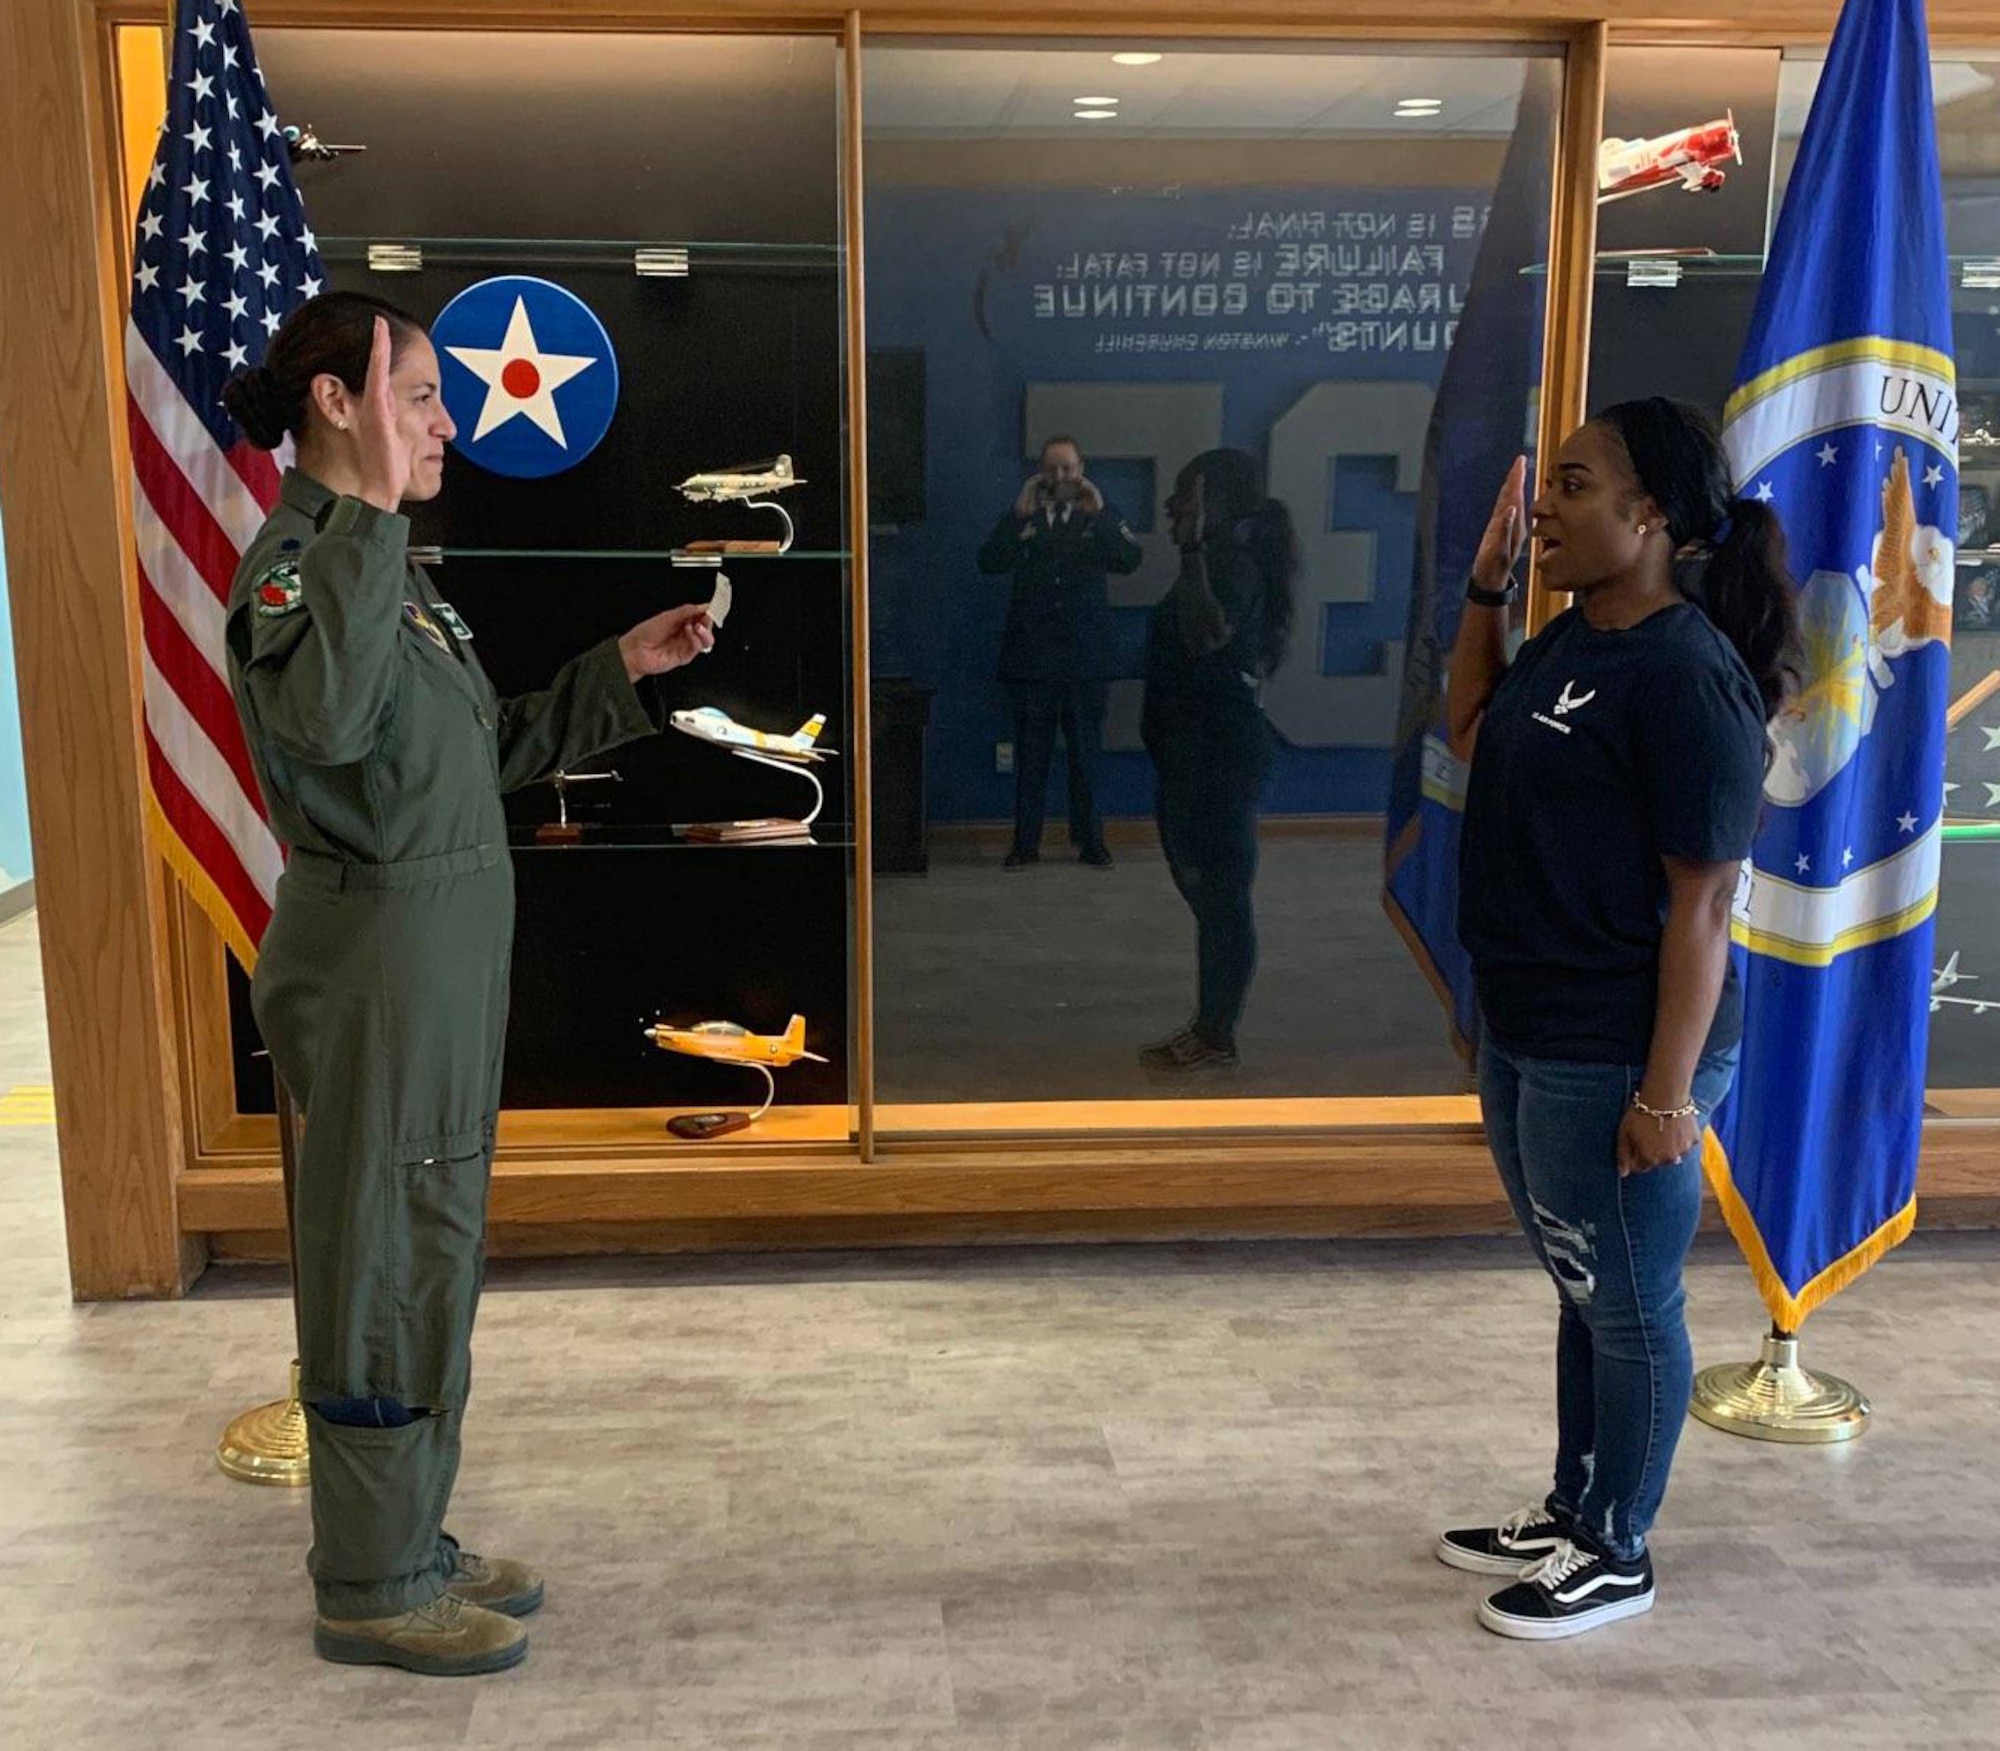 Staff Sgt. Ashley Edwards takes the oath of enlistment from Lt. Col. Sandra Bonney, who at the time was the Air Force ROTC commander at the University of North Texas.